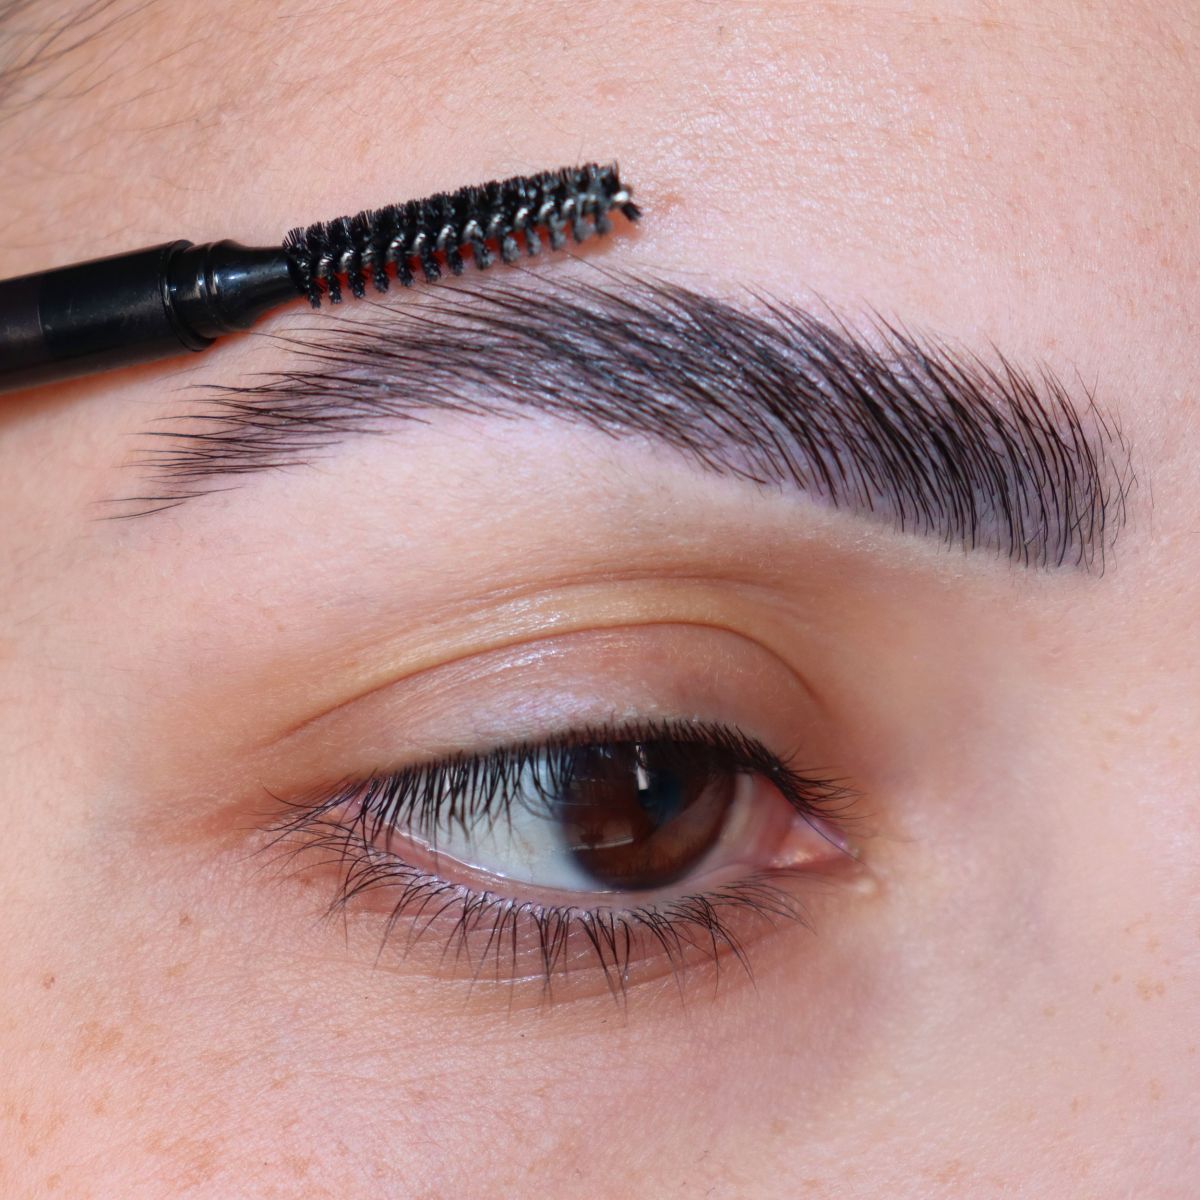 RUN YOUR BRUSH ALONG THE TOP OF THE BROWS